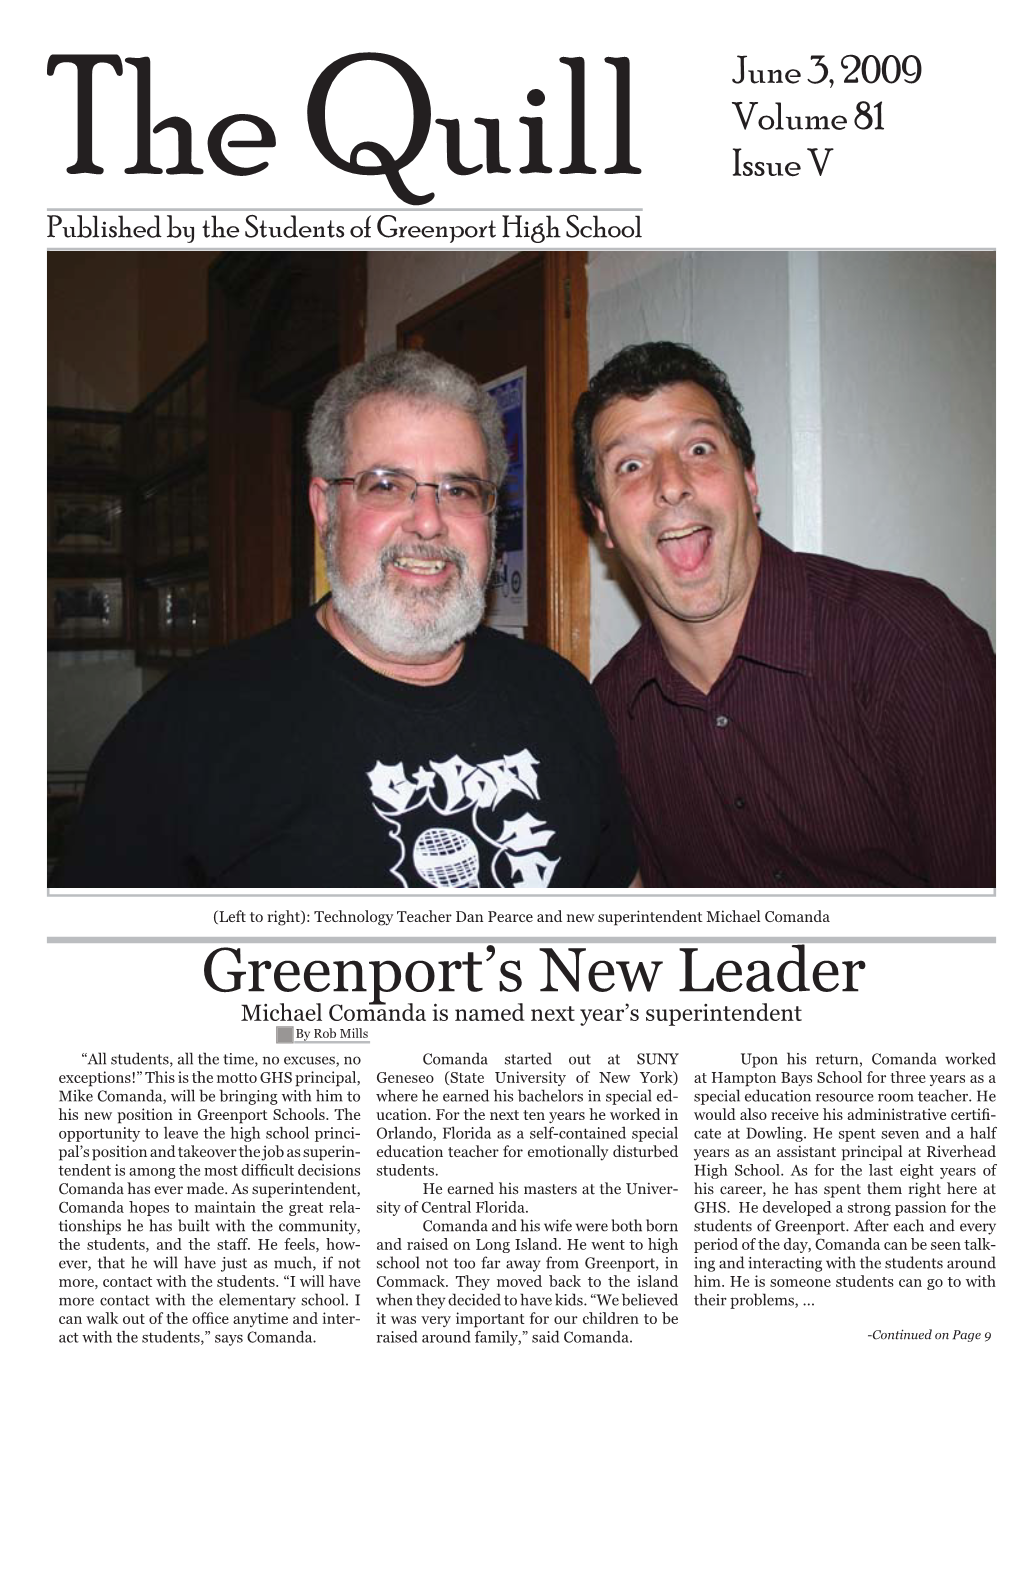 Quill Issue V Published by the Students of Greenport High School